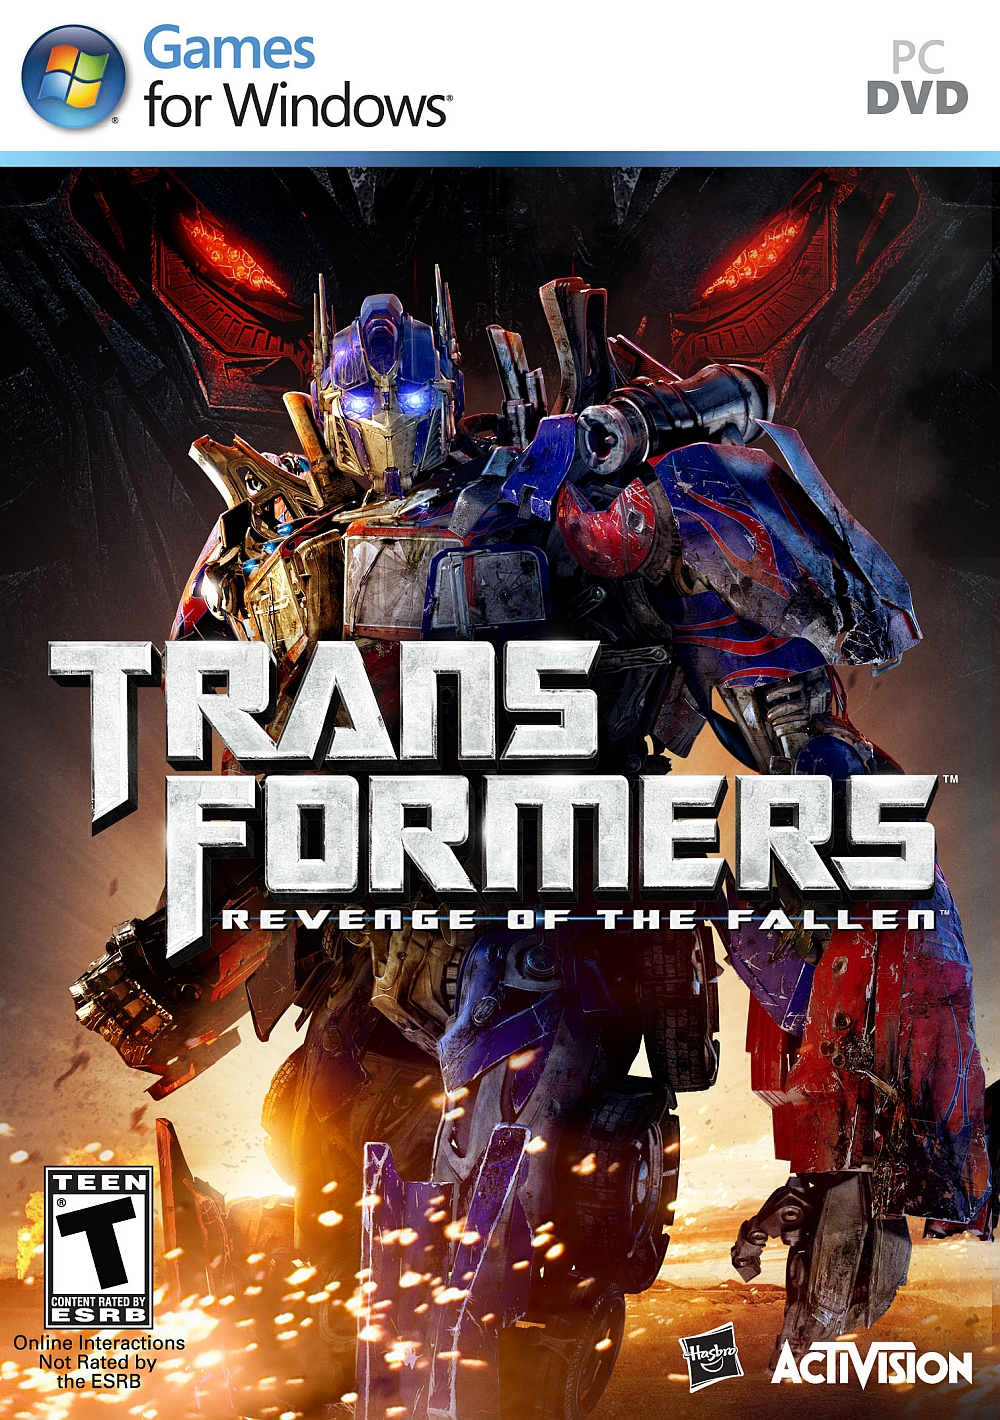 download the new version for android Transformers: Revenge of the Fallen